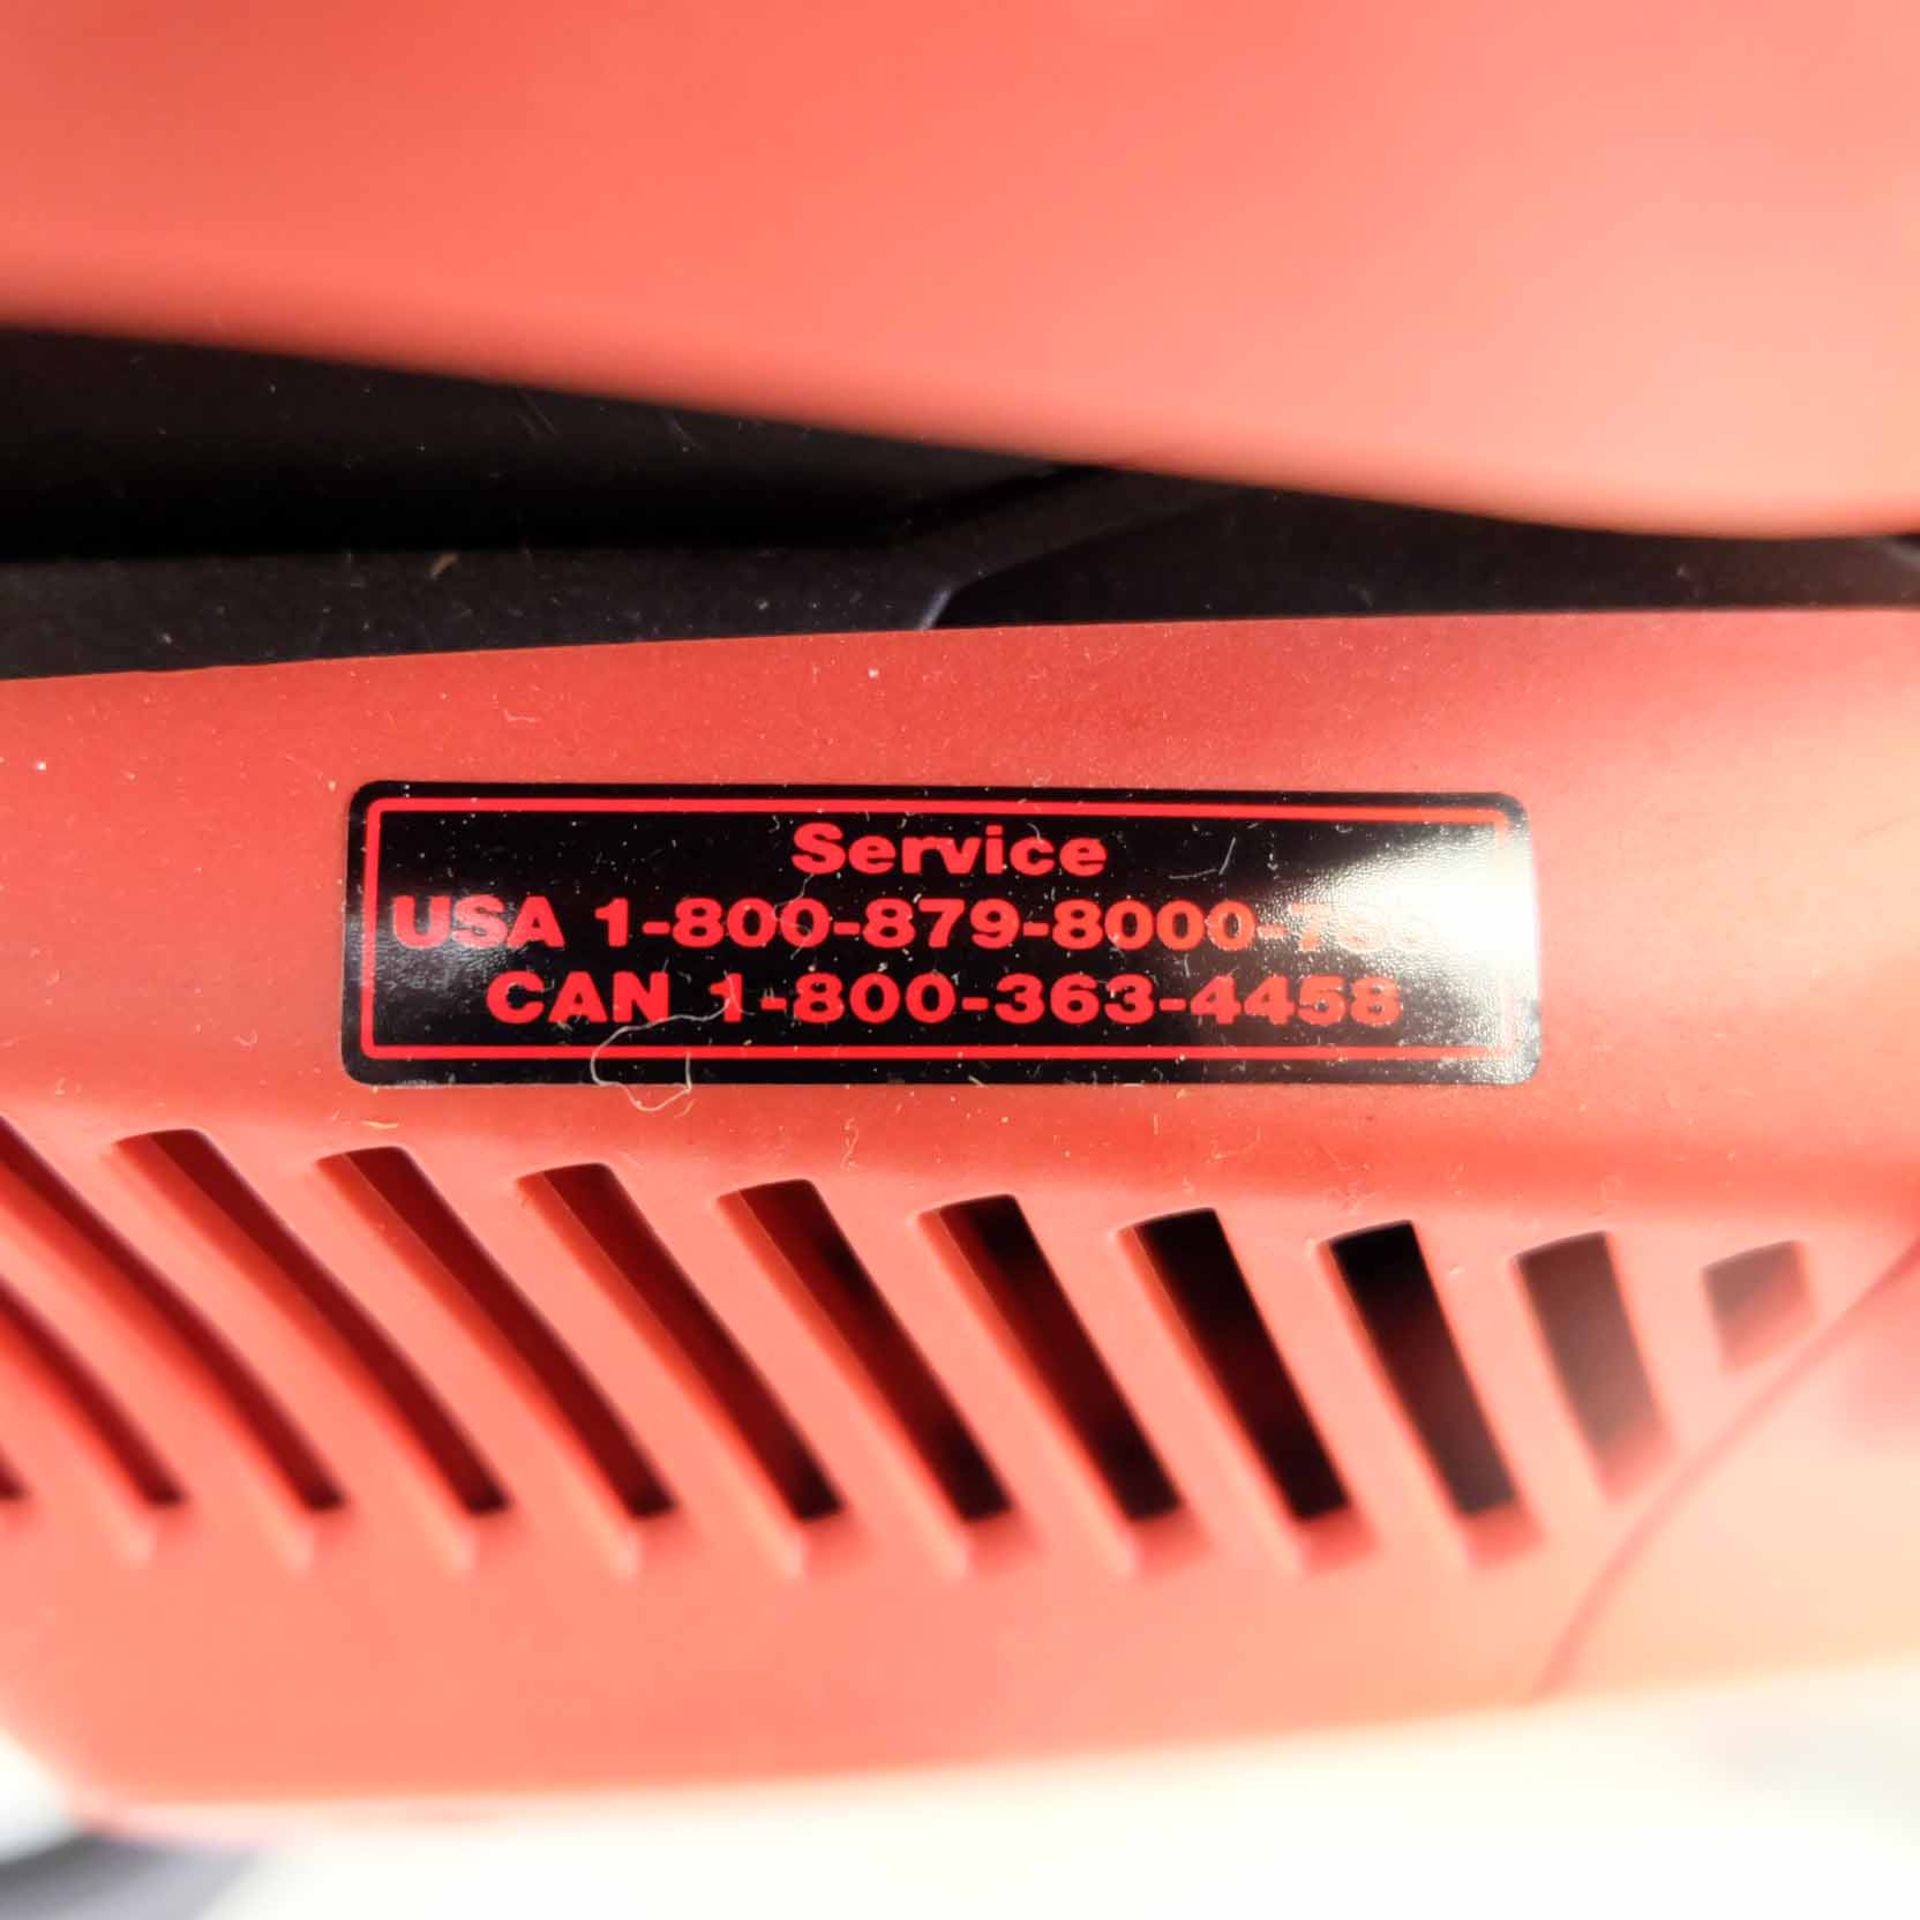 Hilti Hand Held Gas Saw. Model DSH 900-X 16". Complete With SP-16"x1" Blade. Easy Start Auto-Choke S - Image 9 of 25